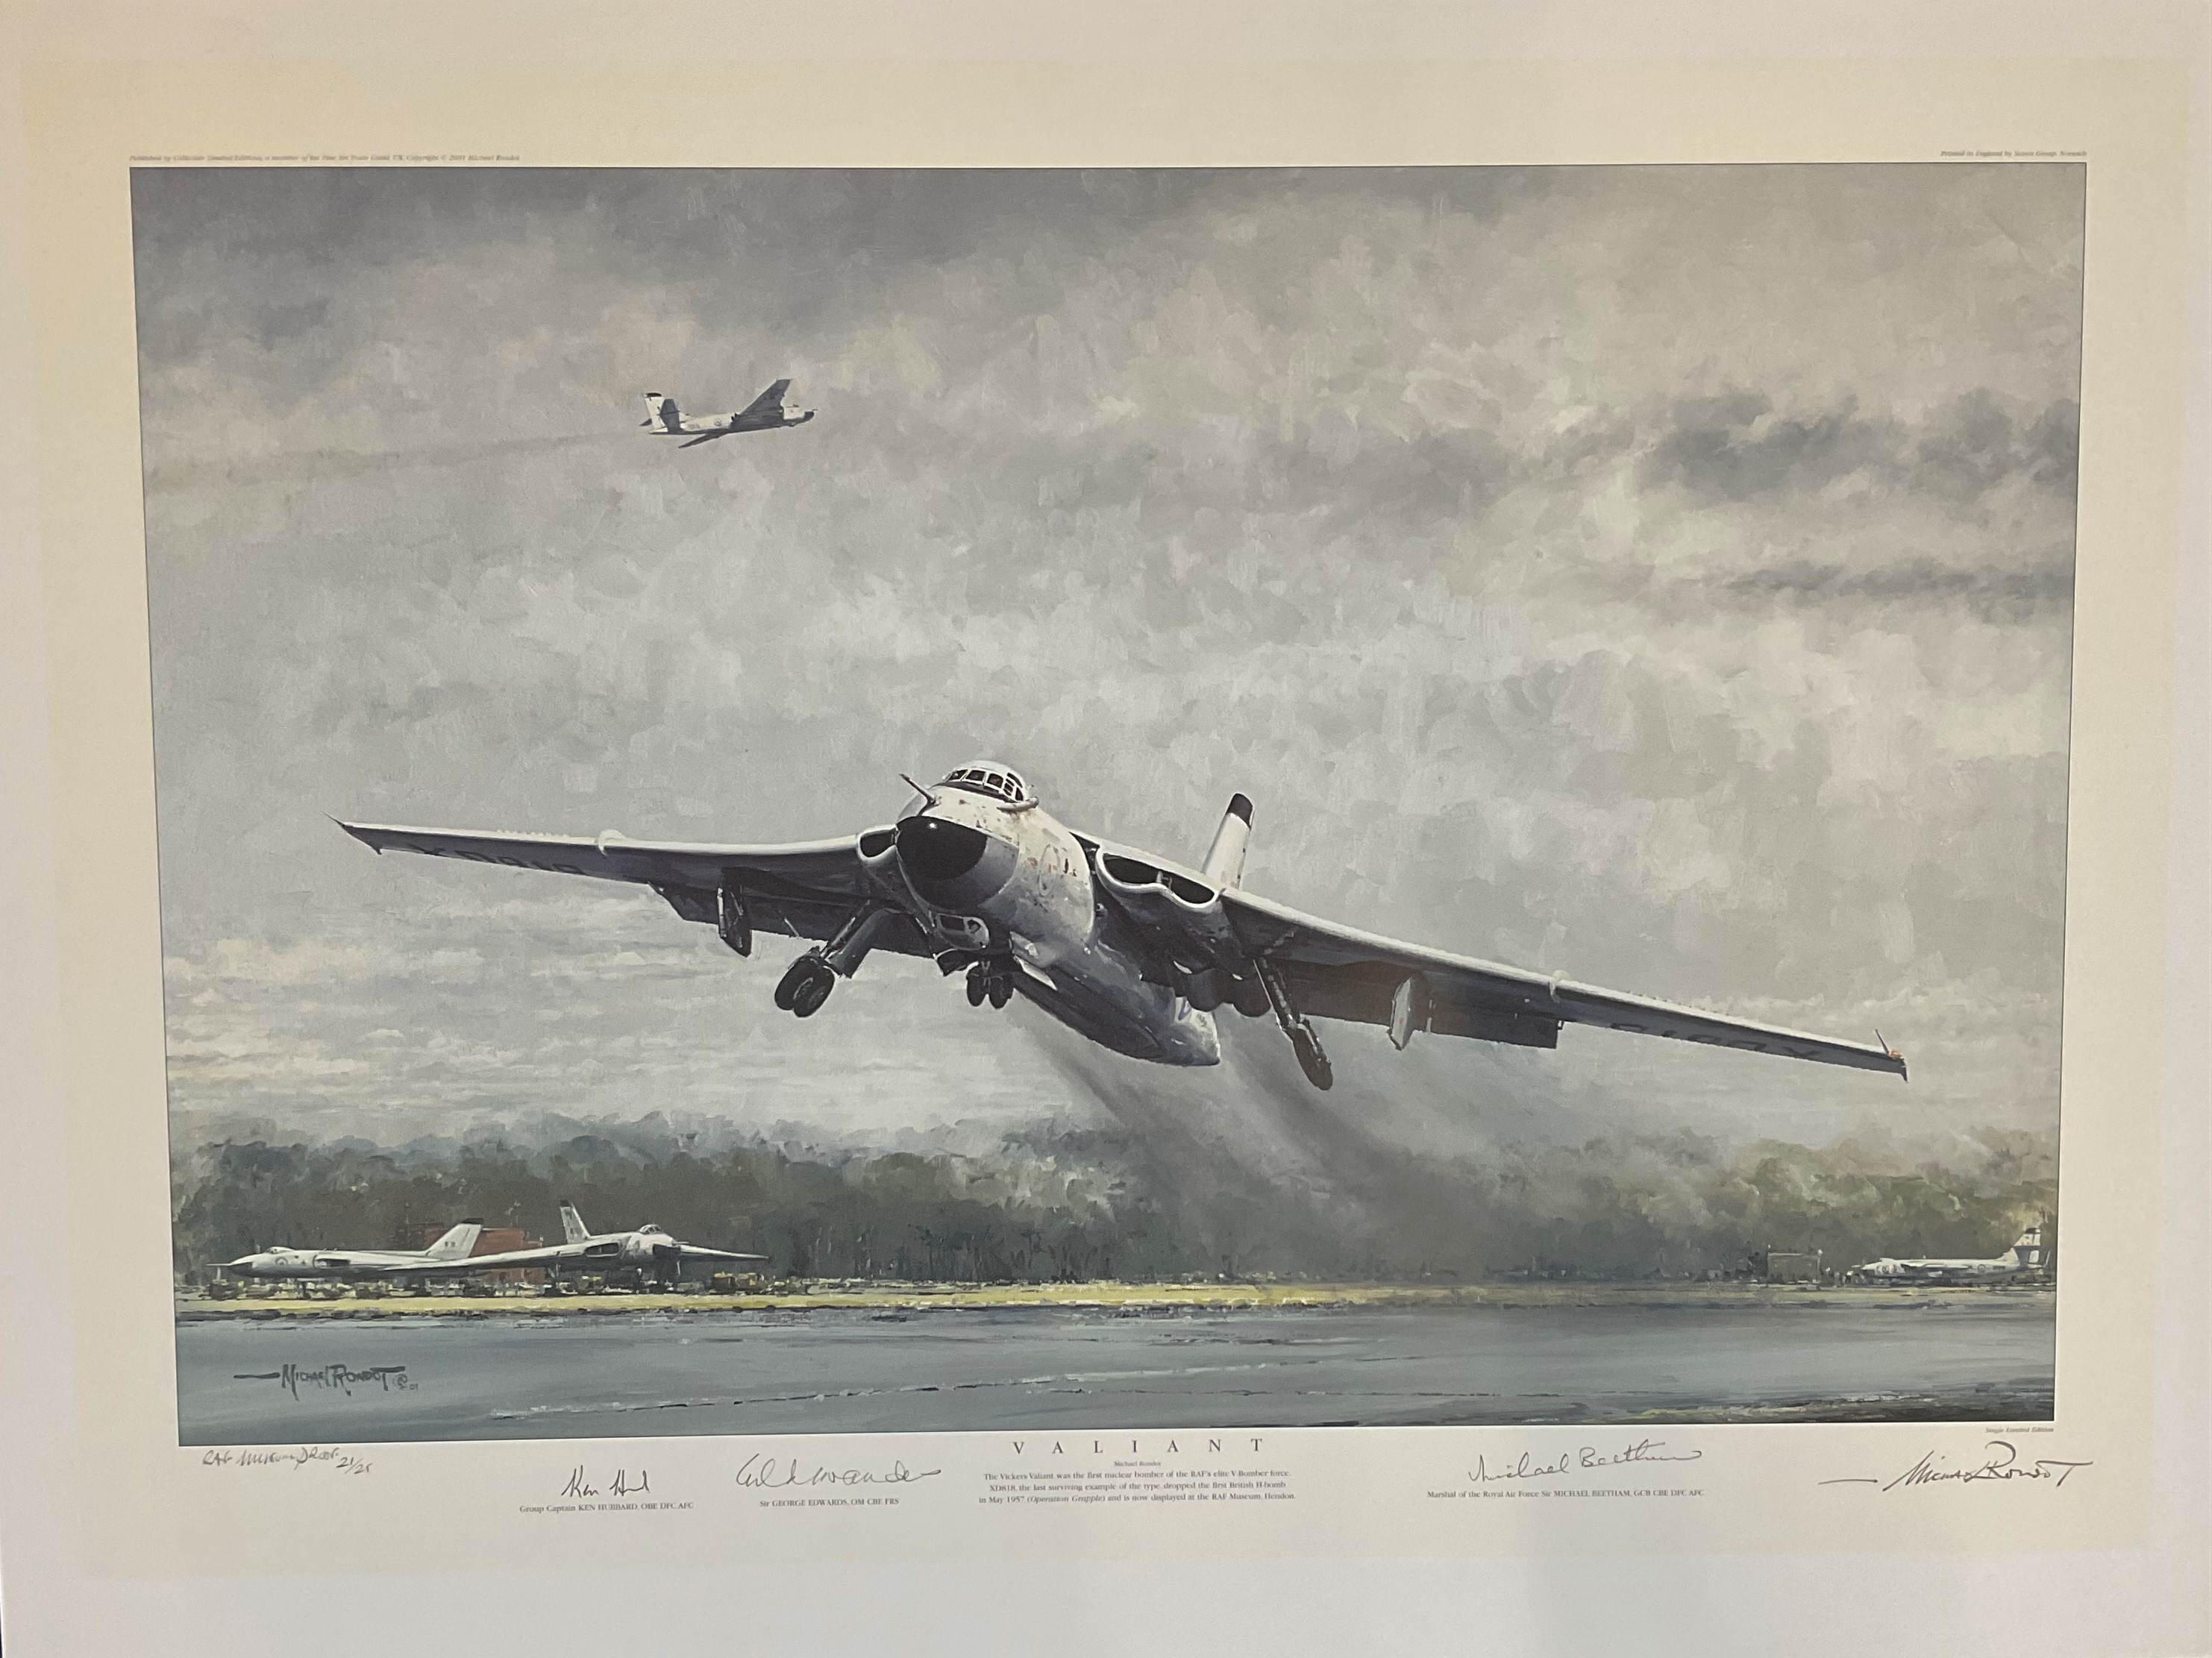 World War II 27x20 colour print titled Valiant limited RAF proof 2/25 signed in pencil by the artist